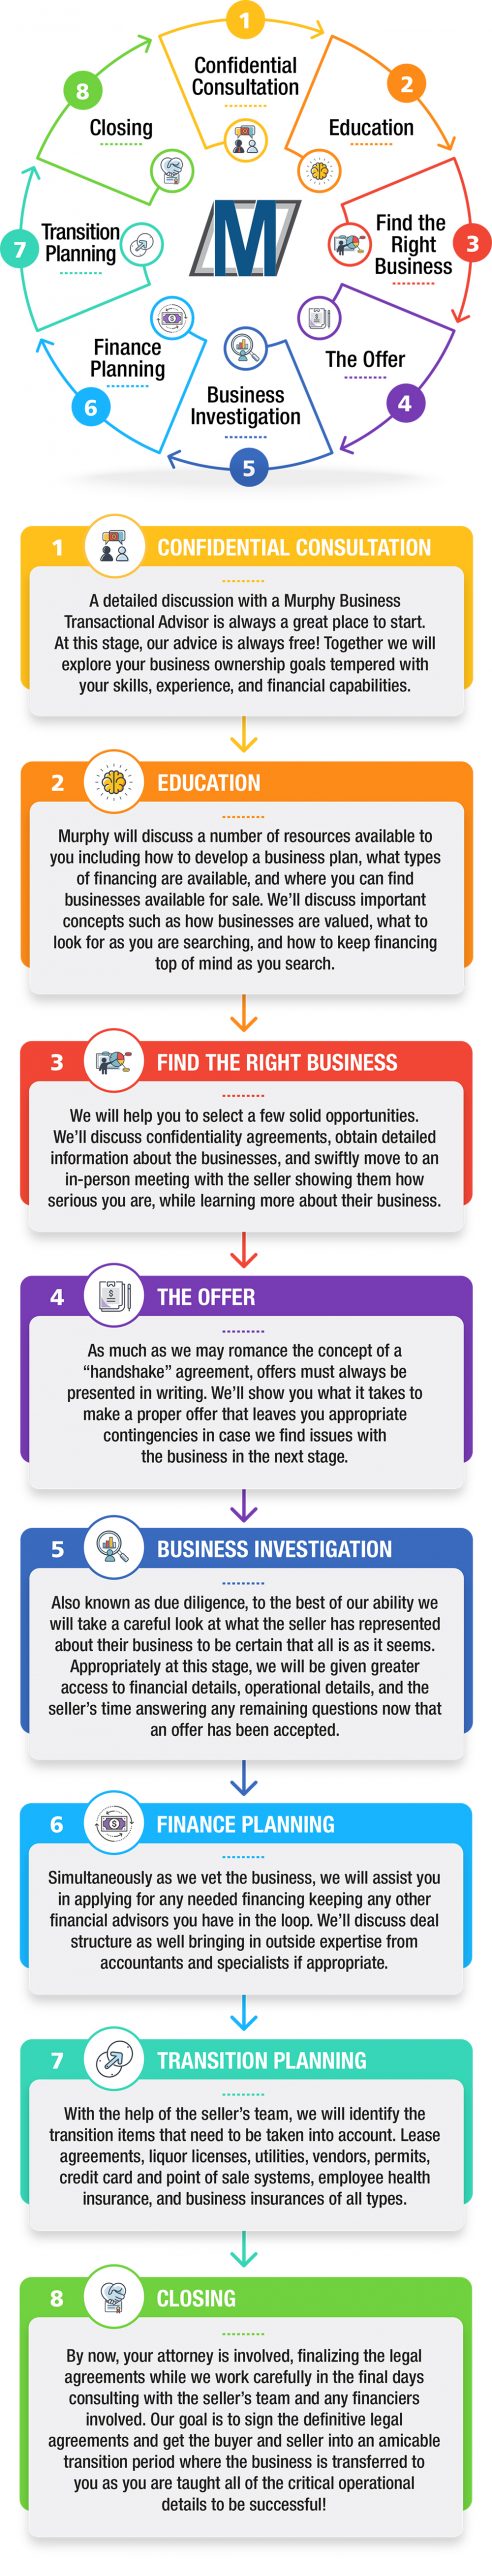 Murphy Business Sales of Ohio Business Buying Process